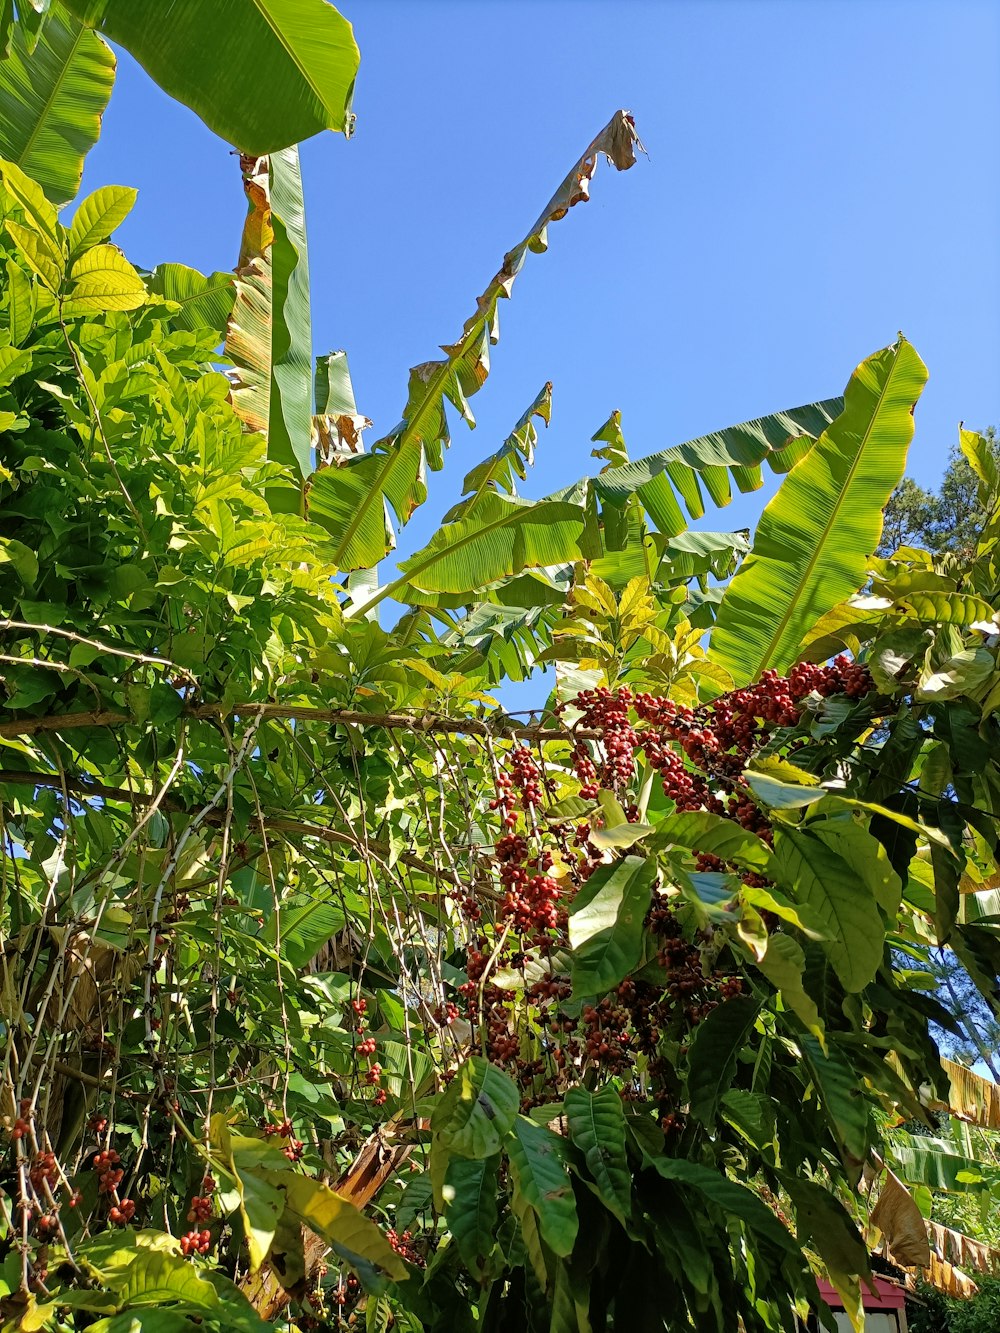 a bunch of leaves and berries growing on a tree